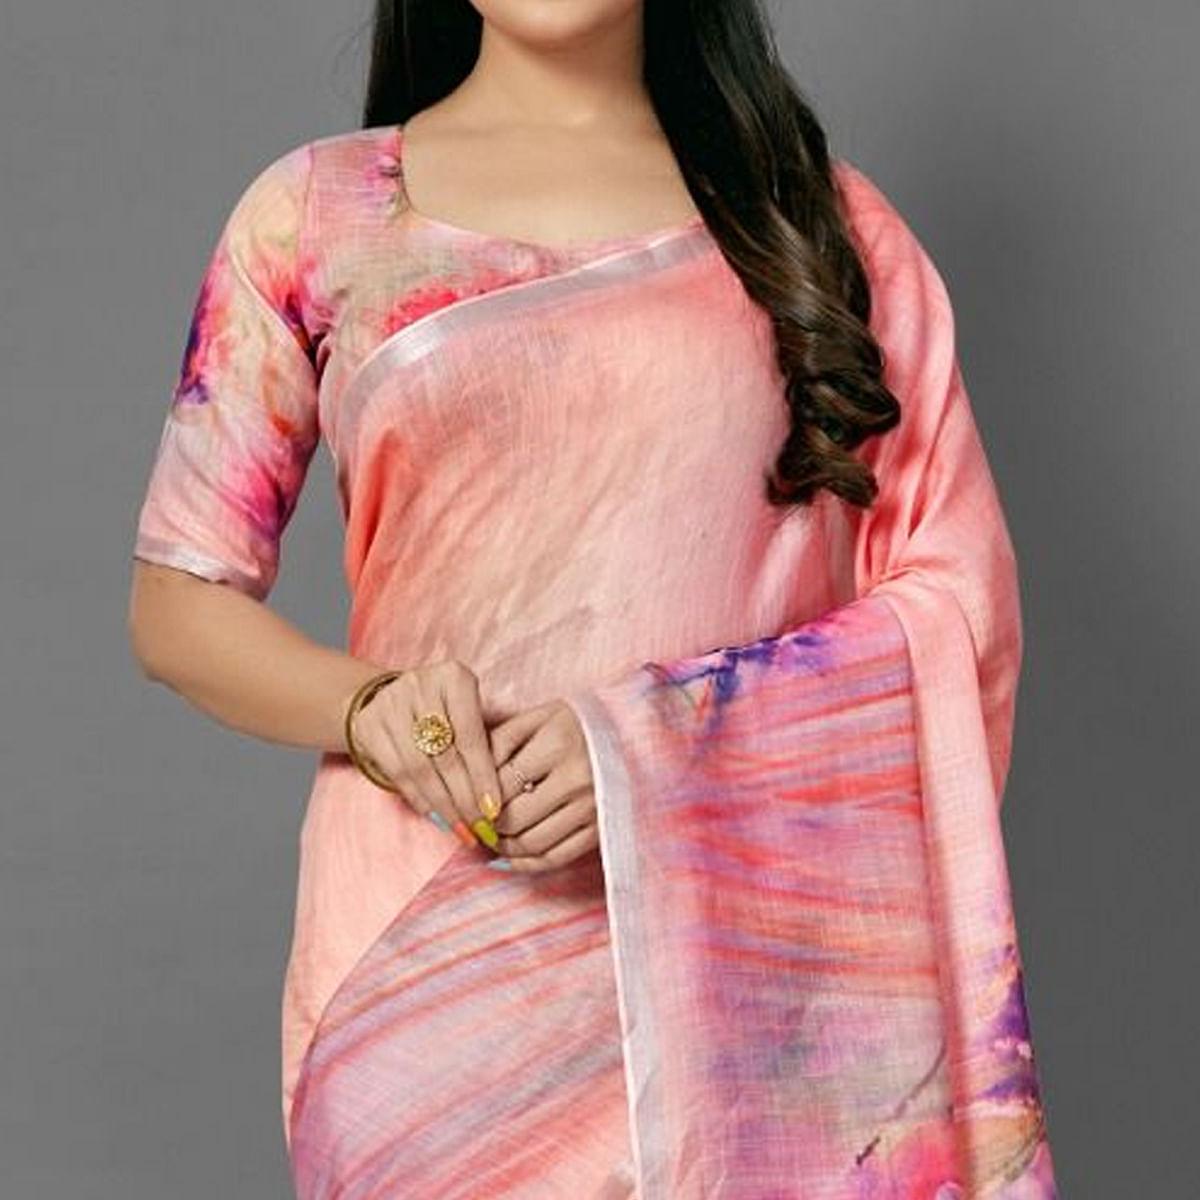 Pink Casual Pure Linen Digital Print Saree With Unstitched Blouse - Peachmode